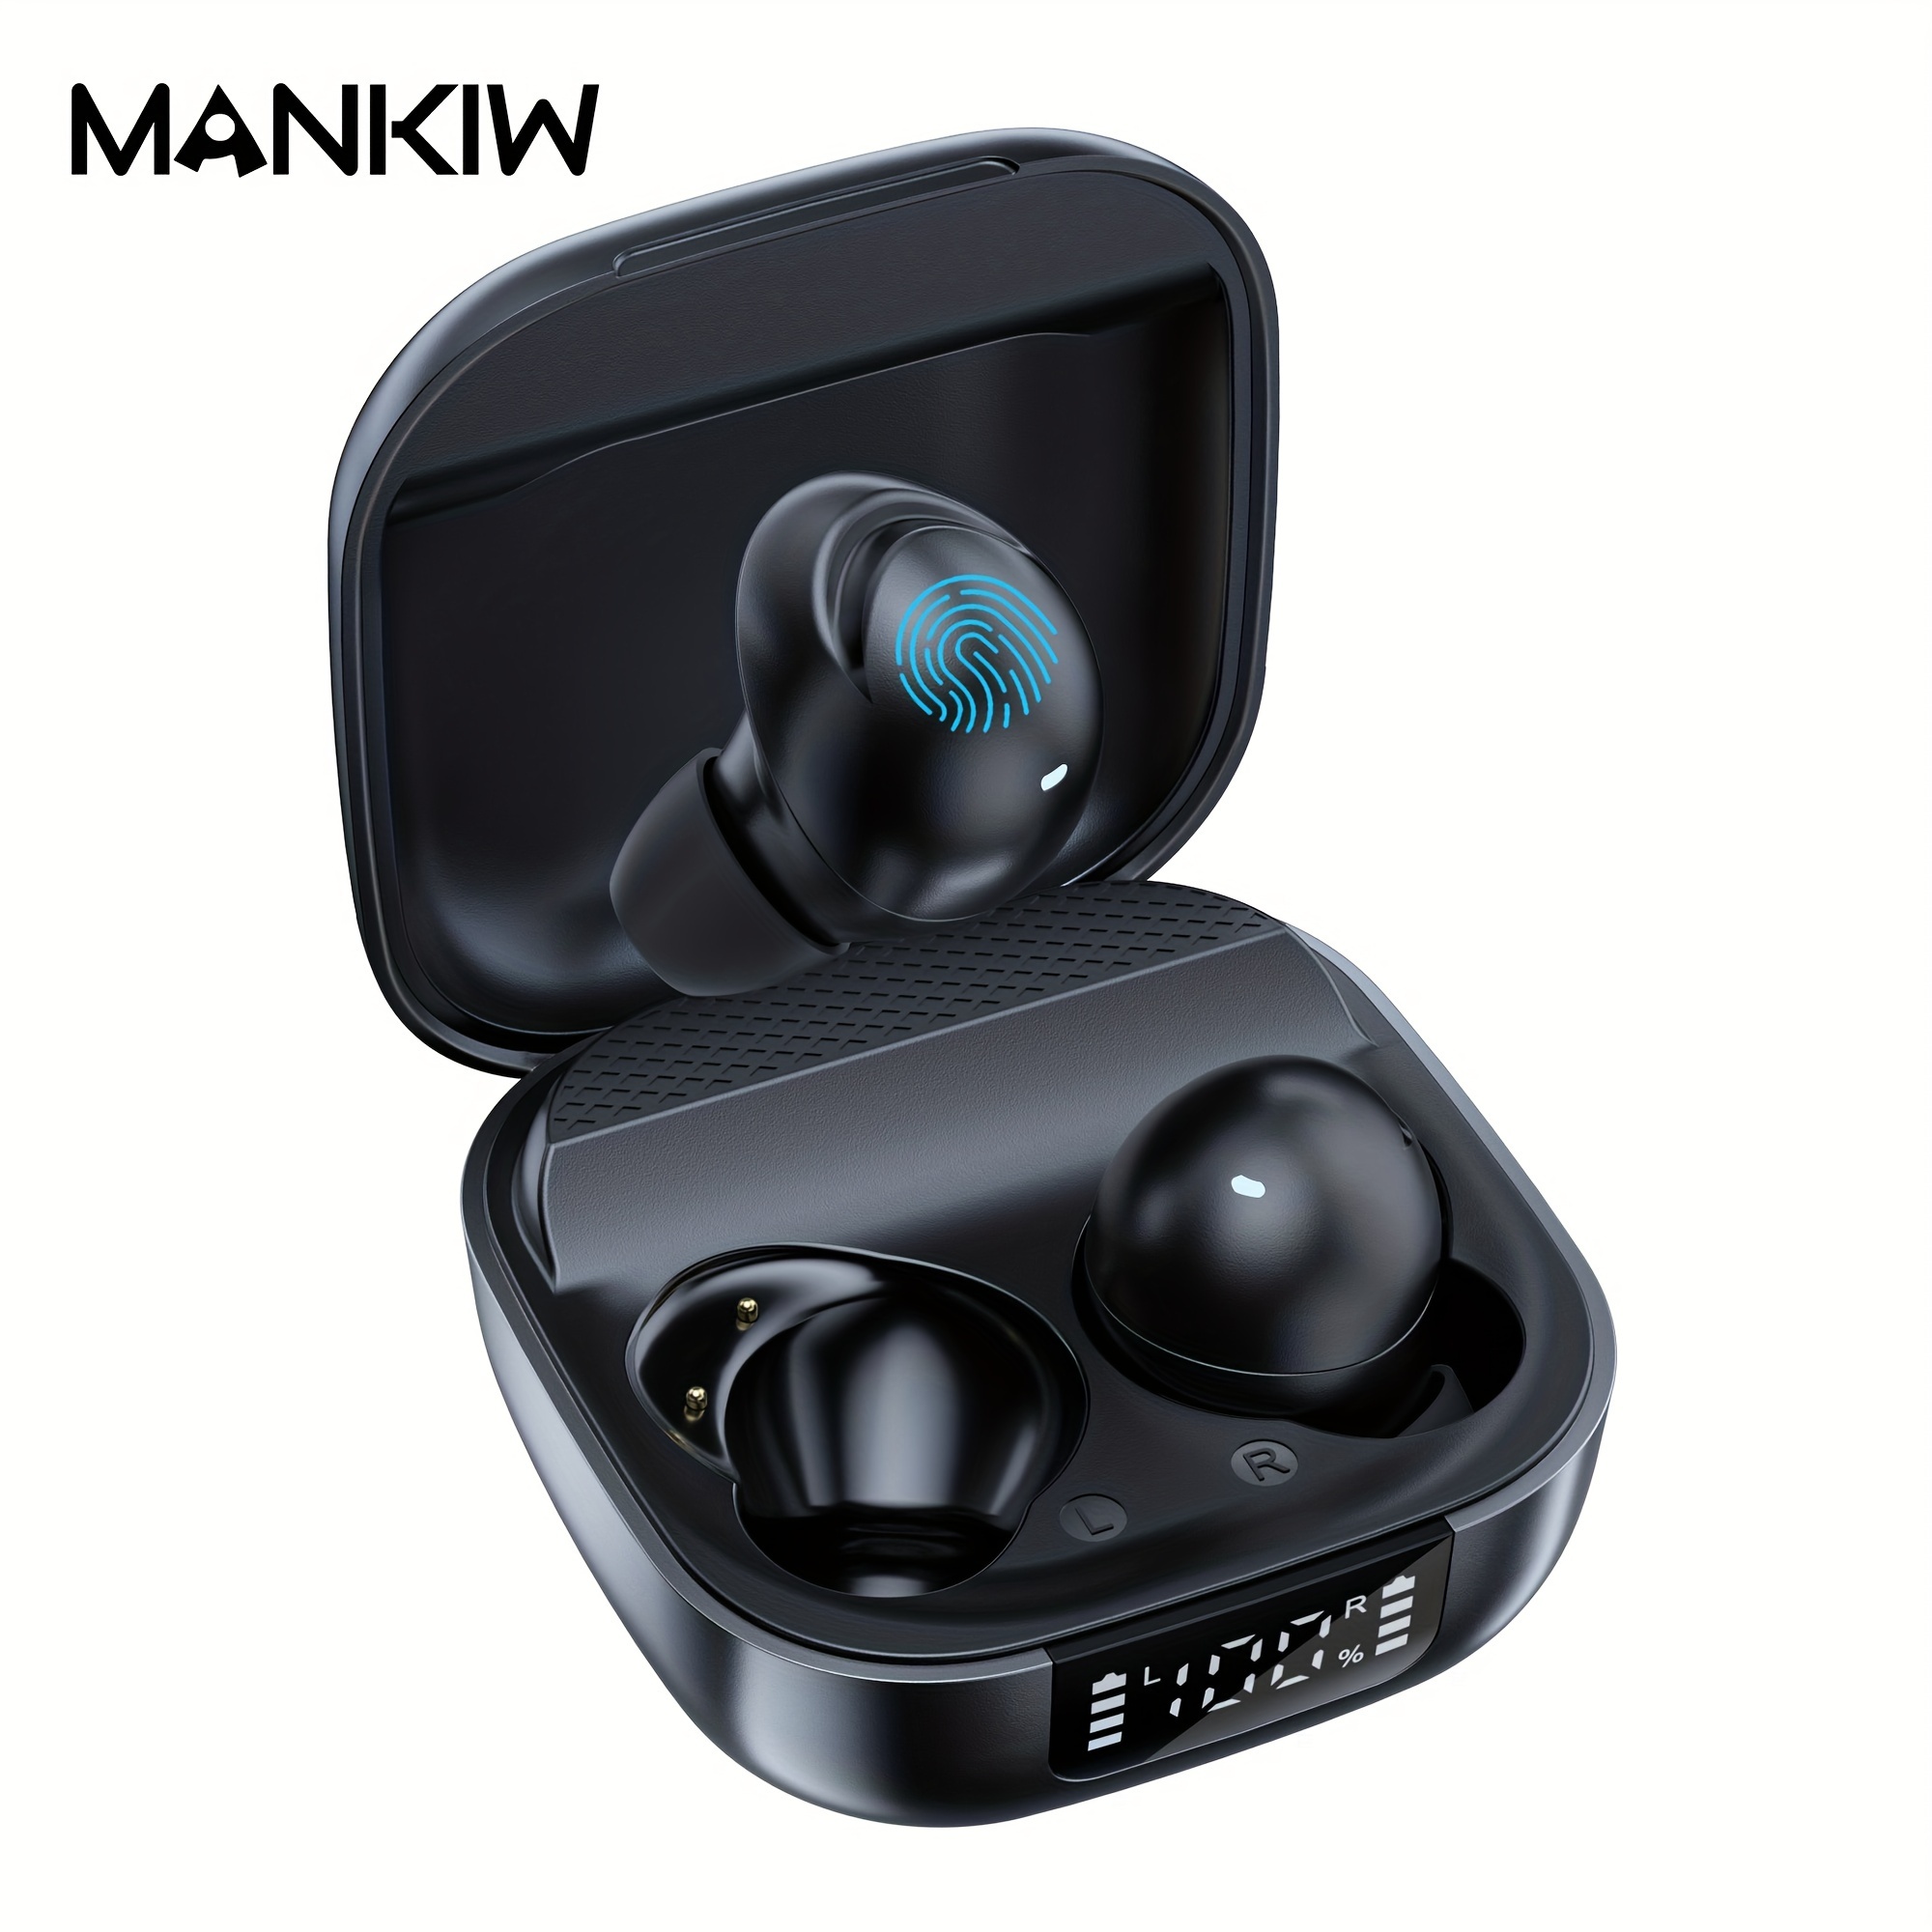 

Mankiw Wireless Earbuds For Android, Wireless Earbuds V5.3 Headphones Stereo Bass Led Display In Ear Earphones 32h Playtime Waterproof Ear Buds Built In Mic For Samsung//tv/window